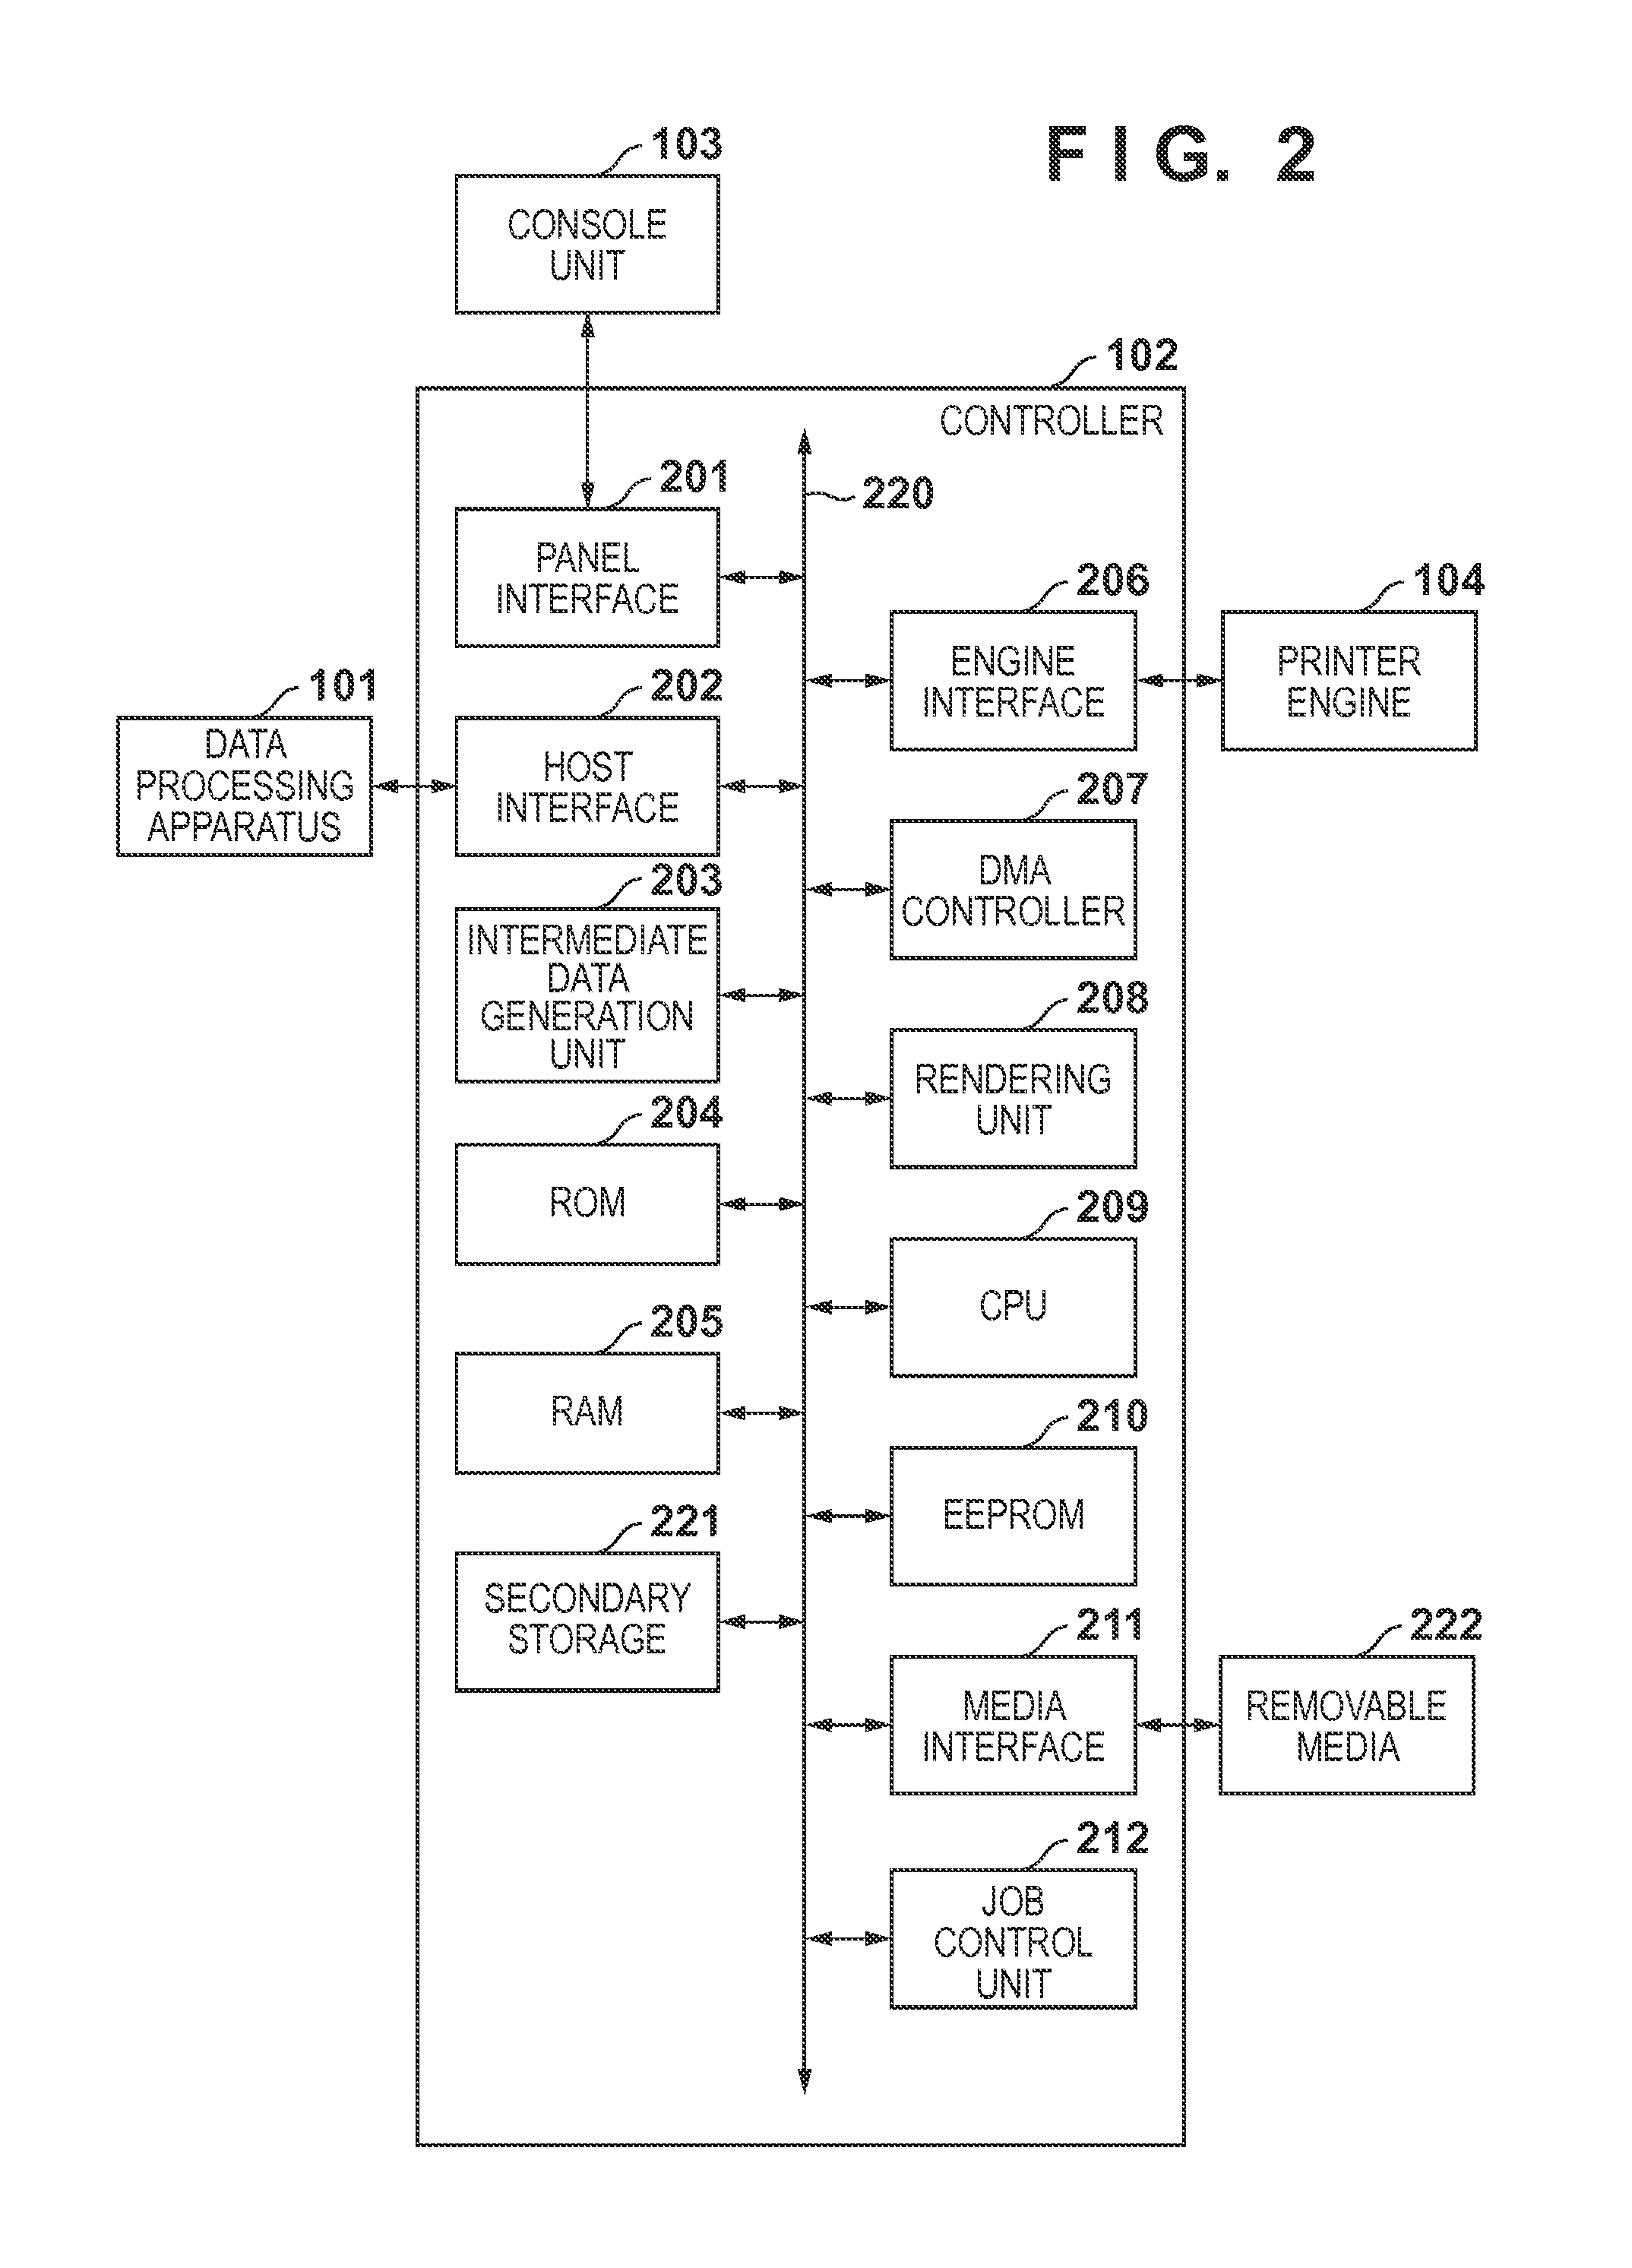 Printing apparatus and method of controlling same